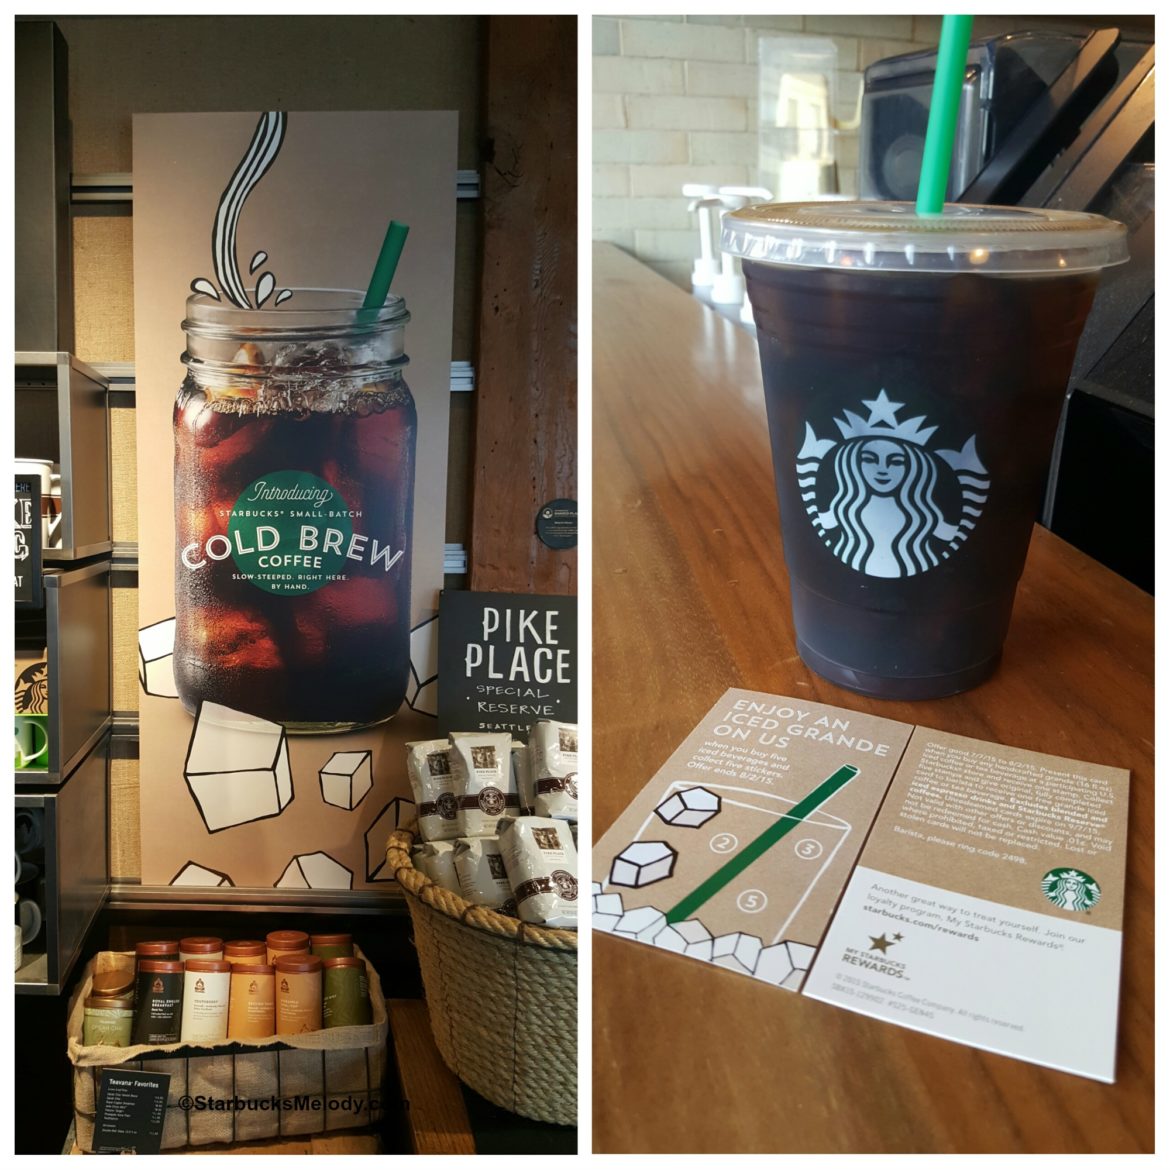 Summer Iced Grande on Starbucks: Buy 5 & collect the stickers and then get one free!